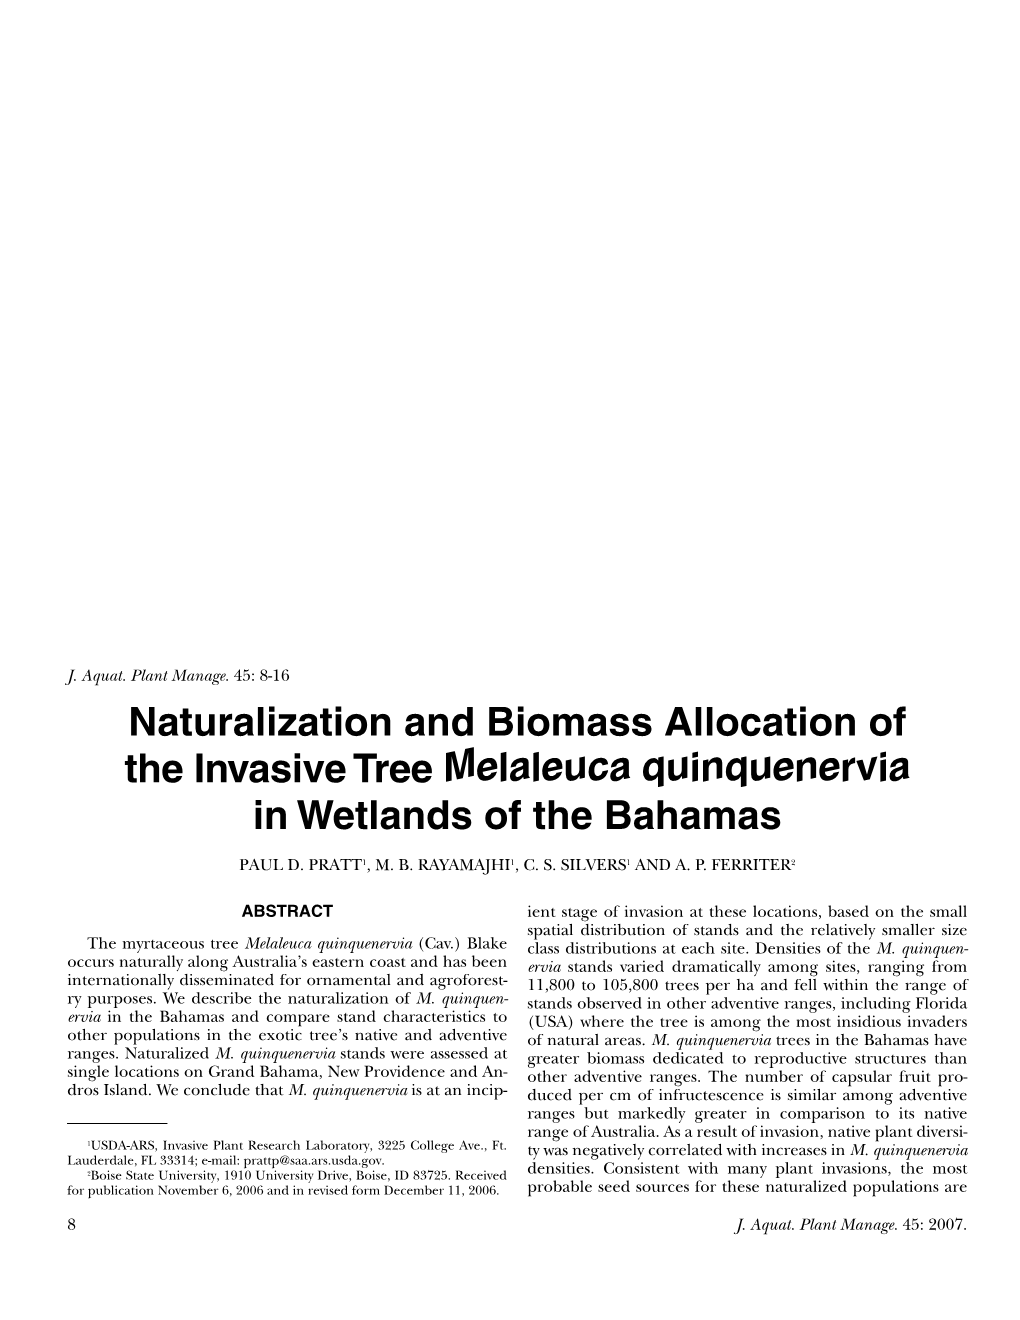 Naturalization and Biomass Allocation of the Invasive Tree Melaleuca Quinquenervia in Wetlands of the Bahamas